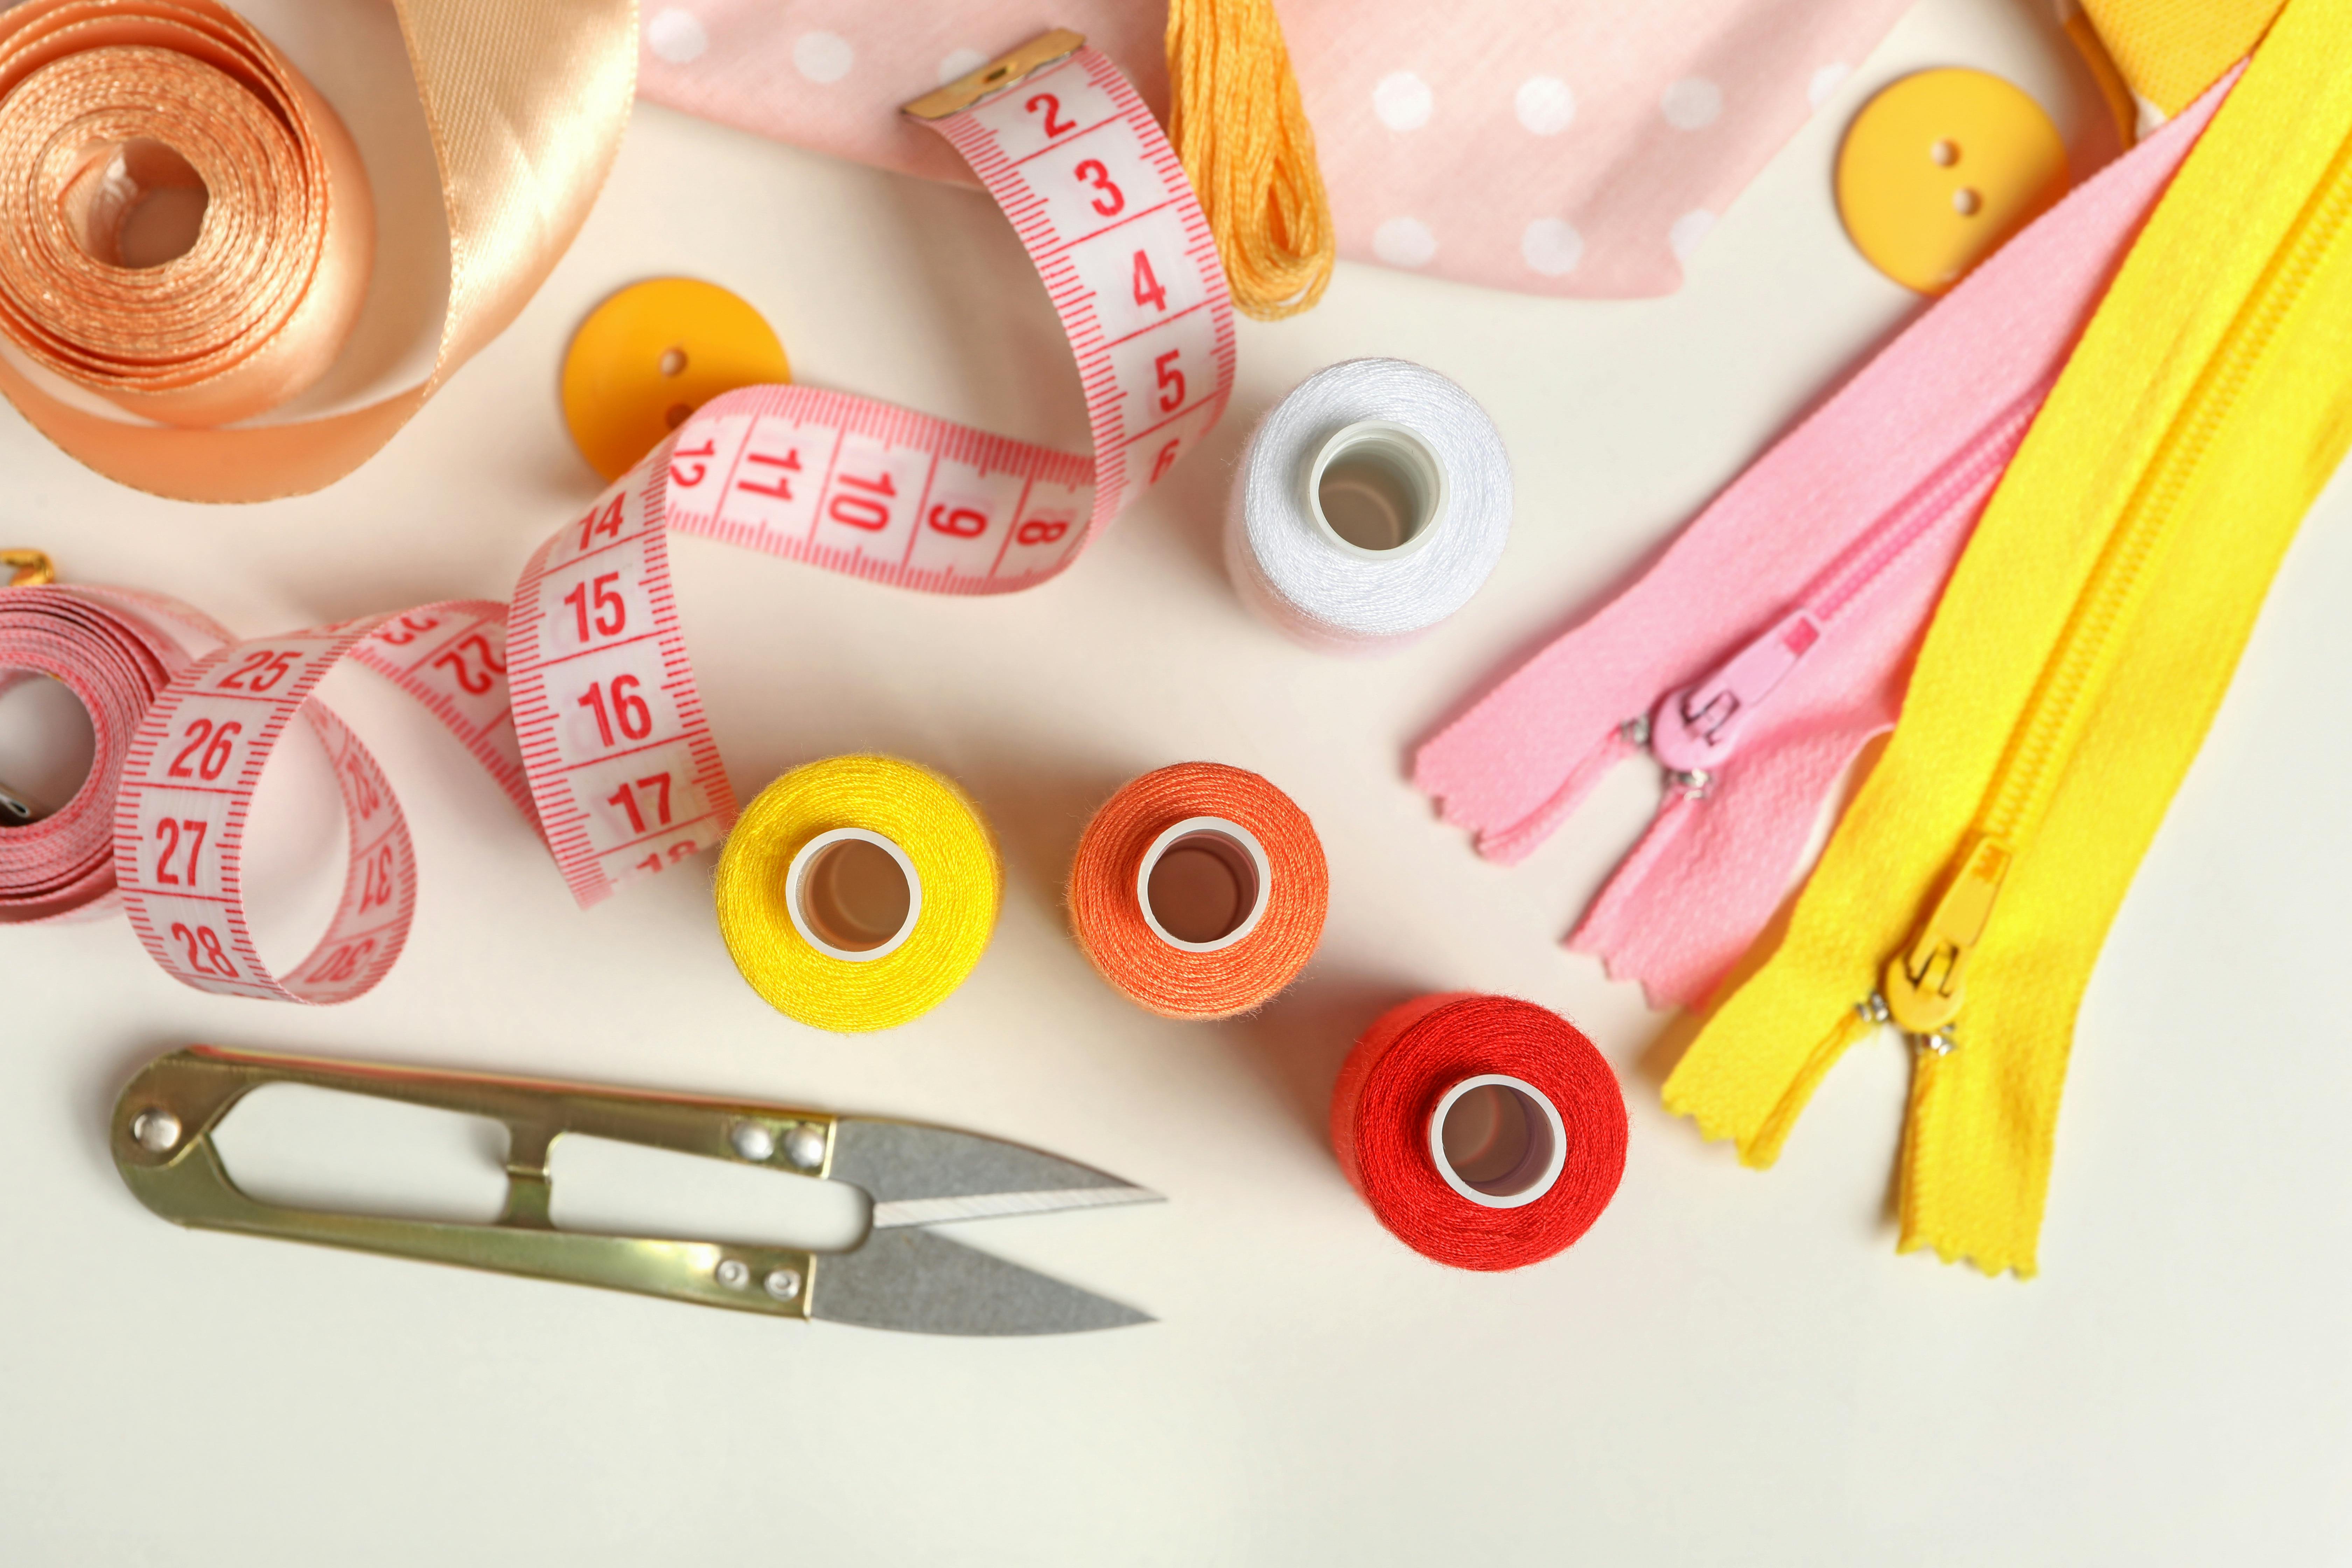  flat lay of sewing supplies like thread, snips, measuring tape